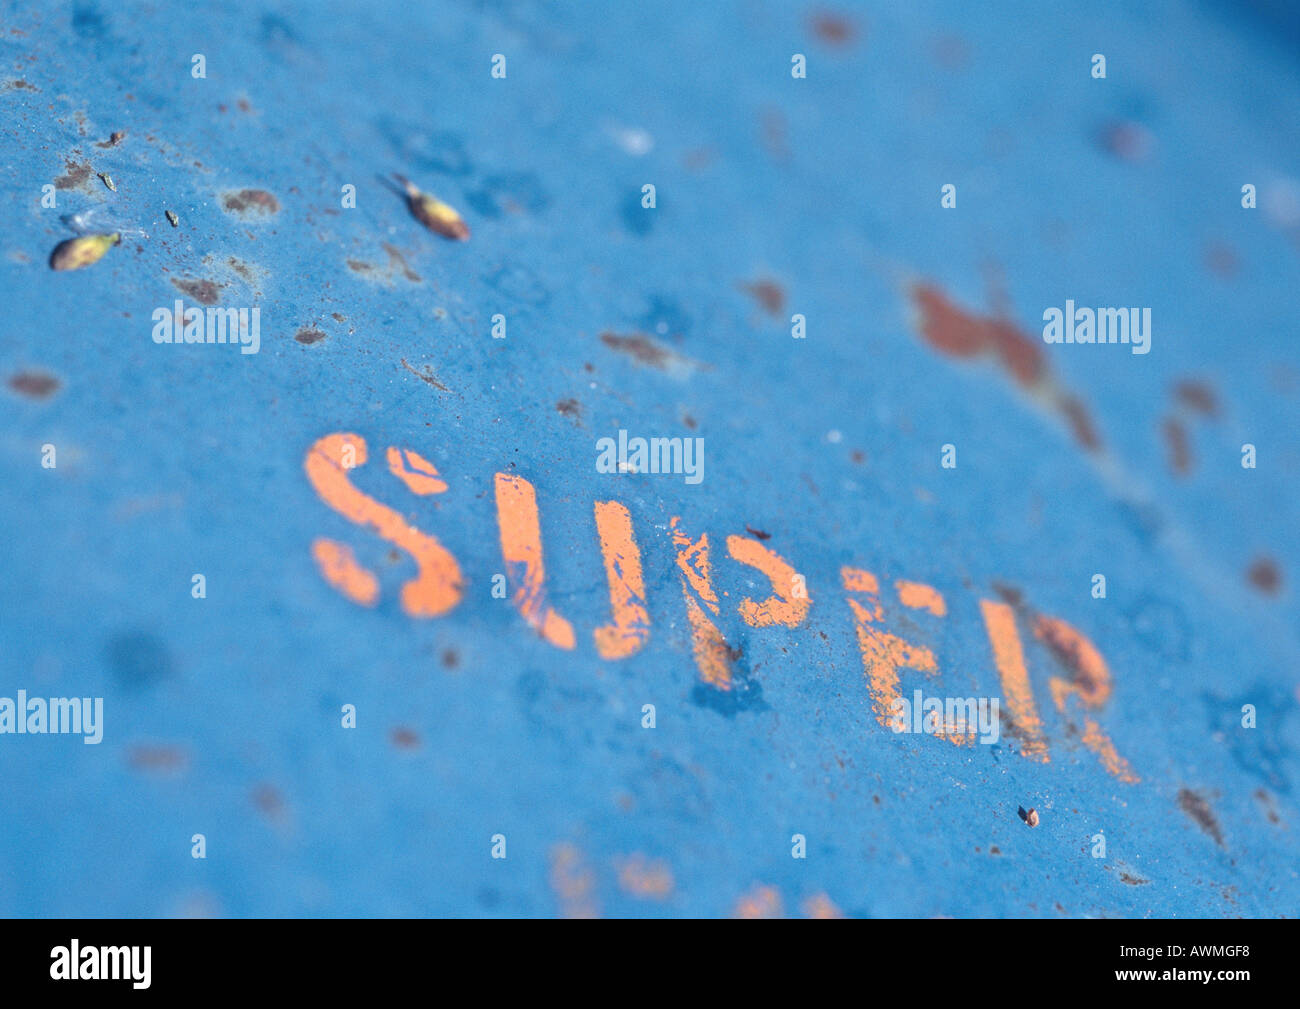 Super text stenciled on rusty surface, close-up Stock Photo